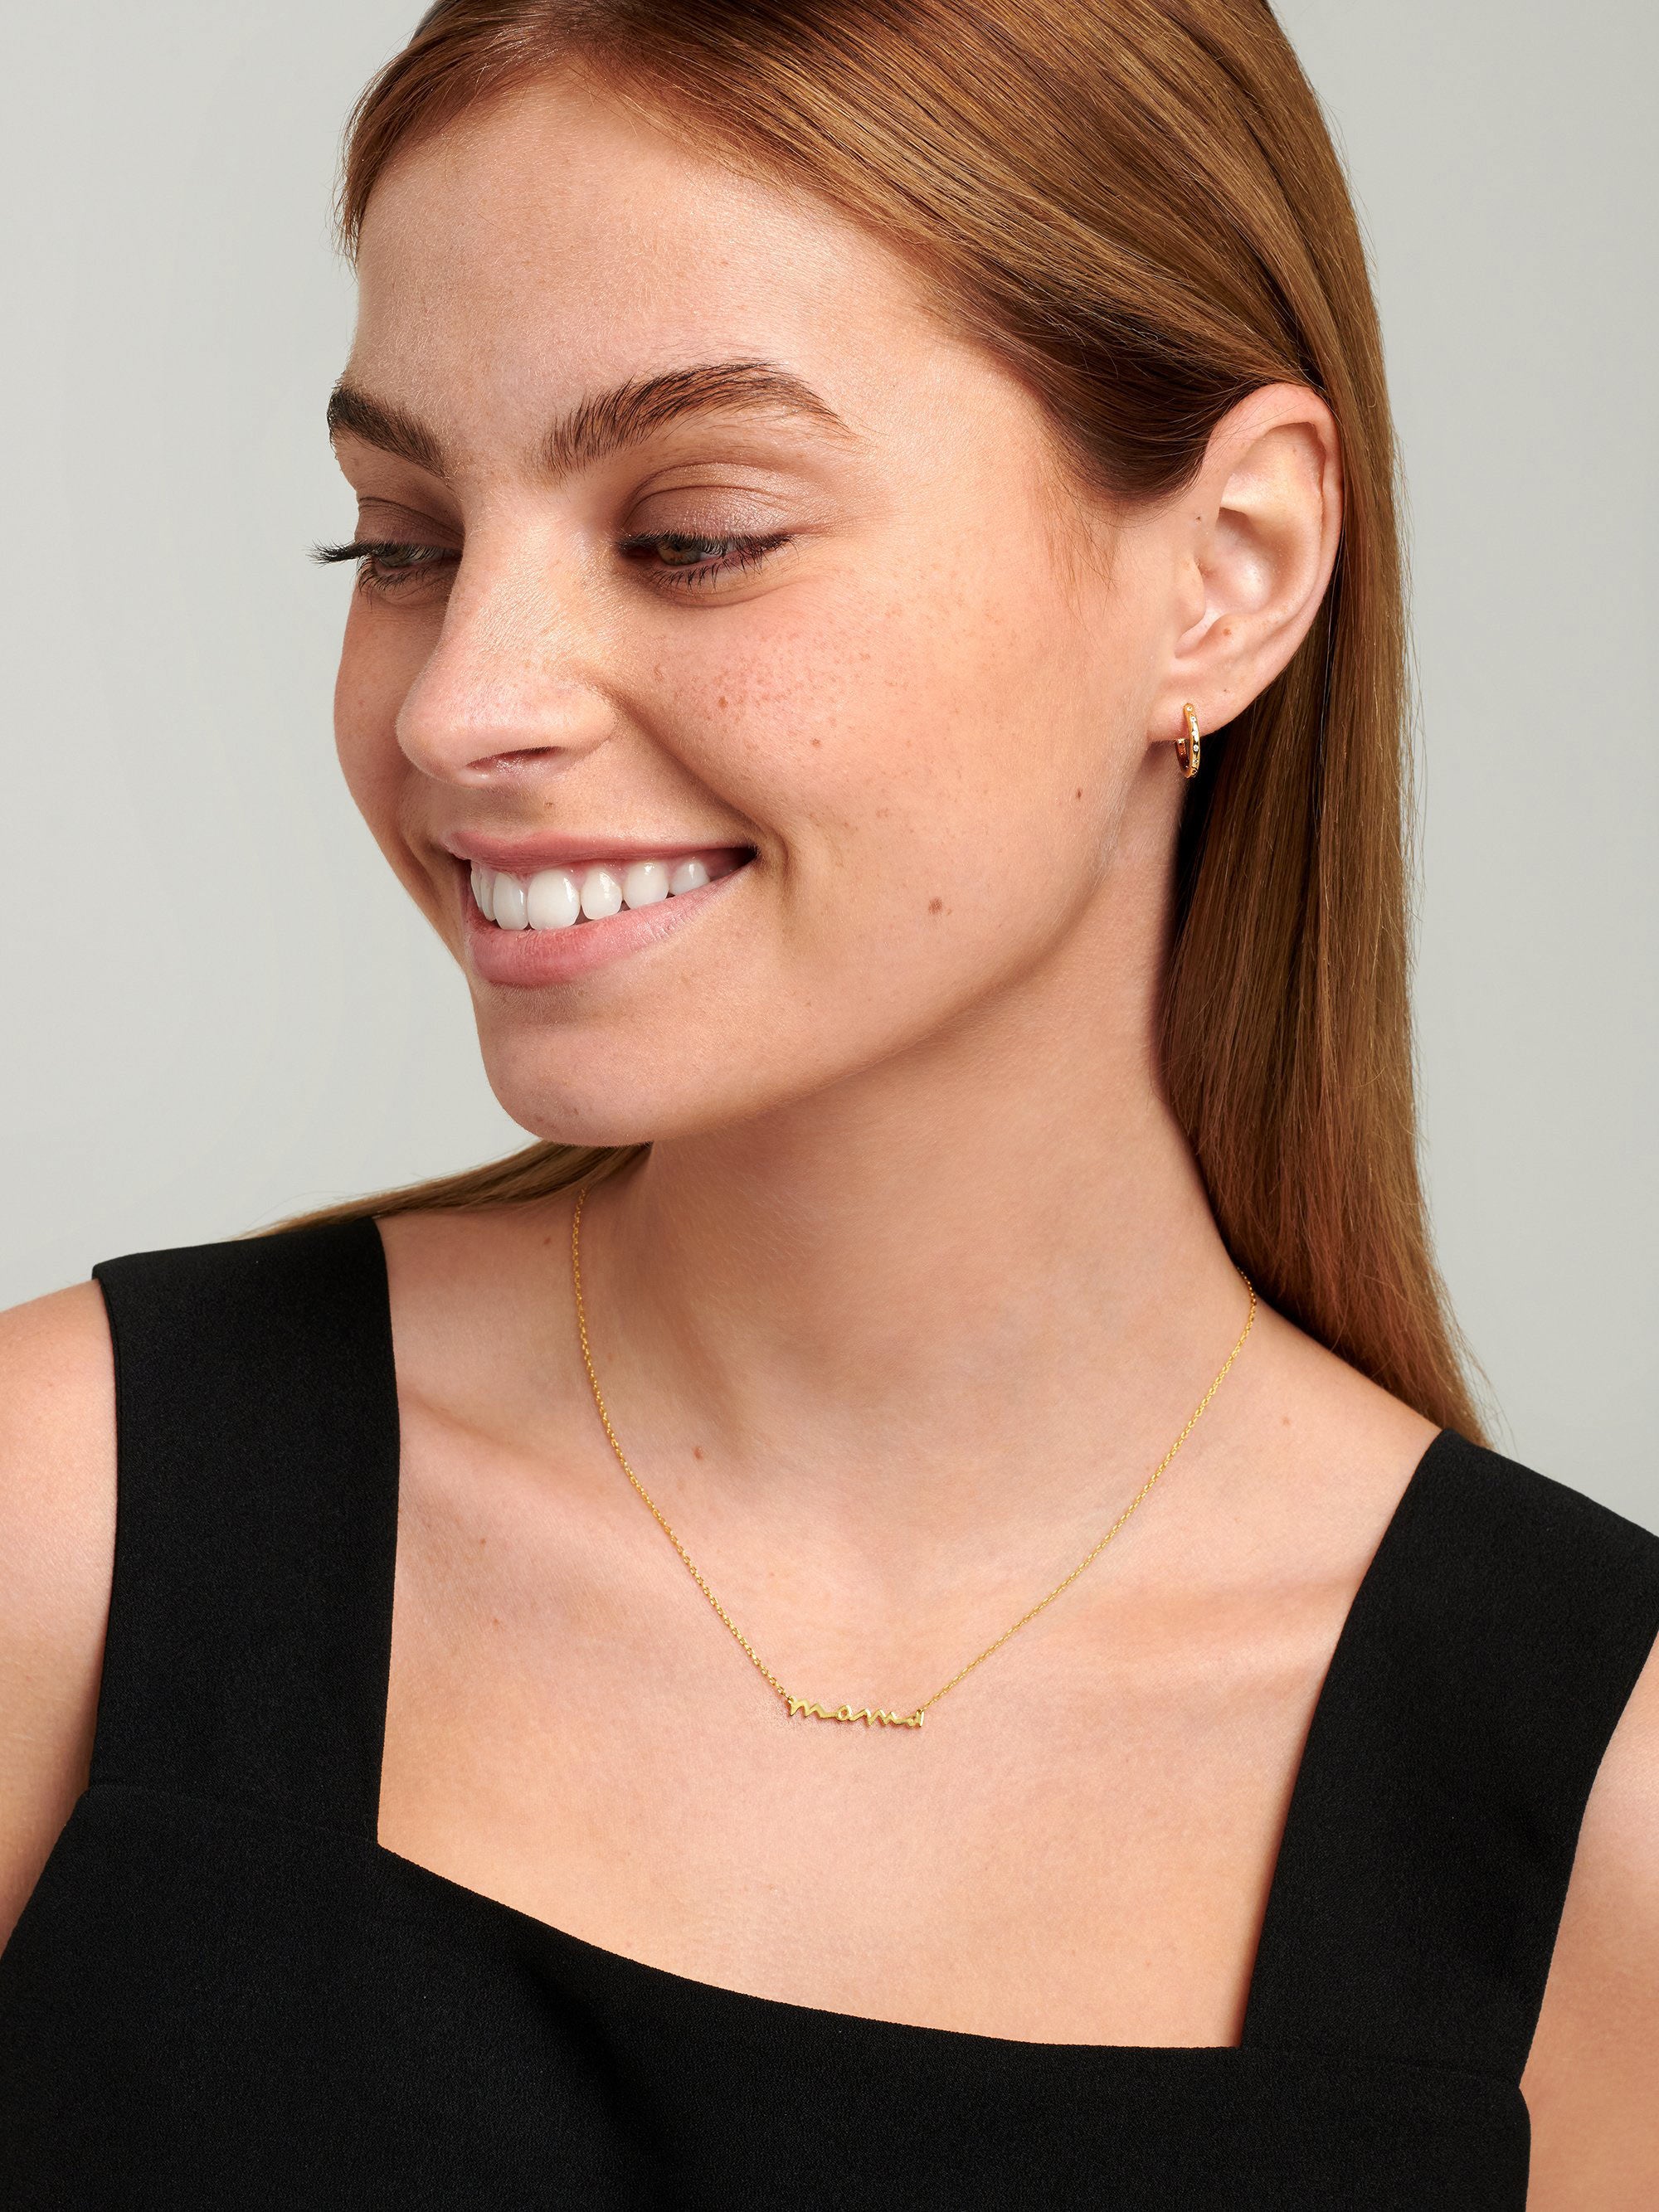 Model wearing script necklace with the word mama in a handwritten style.